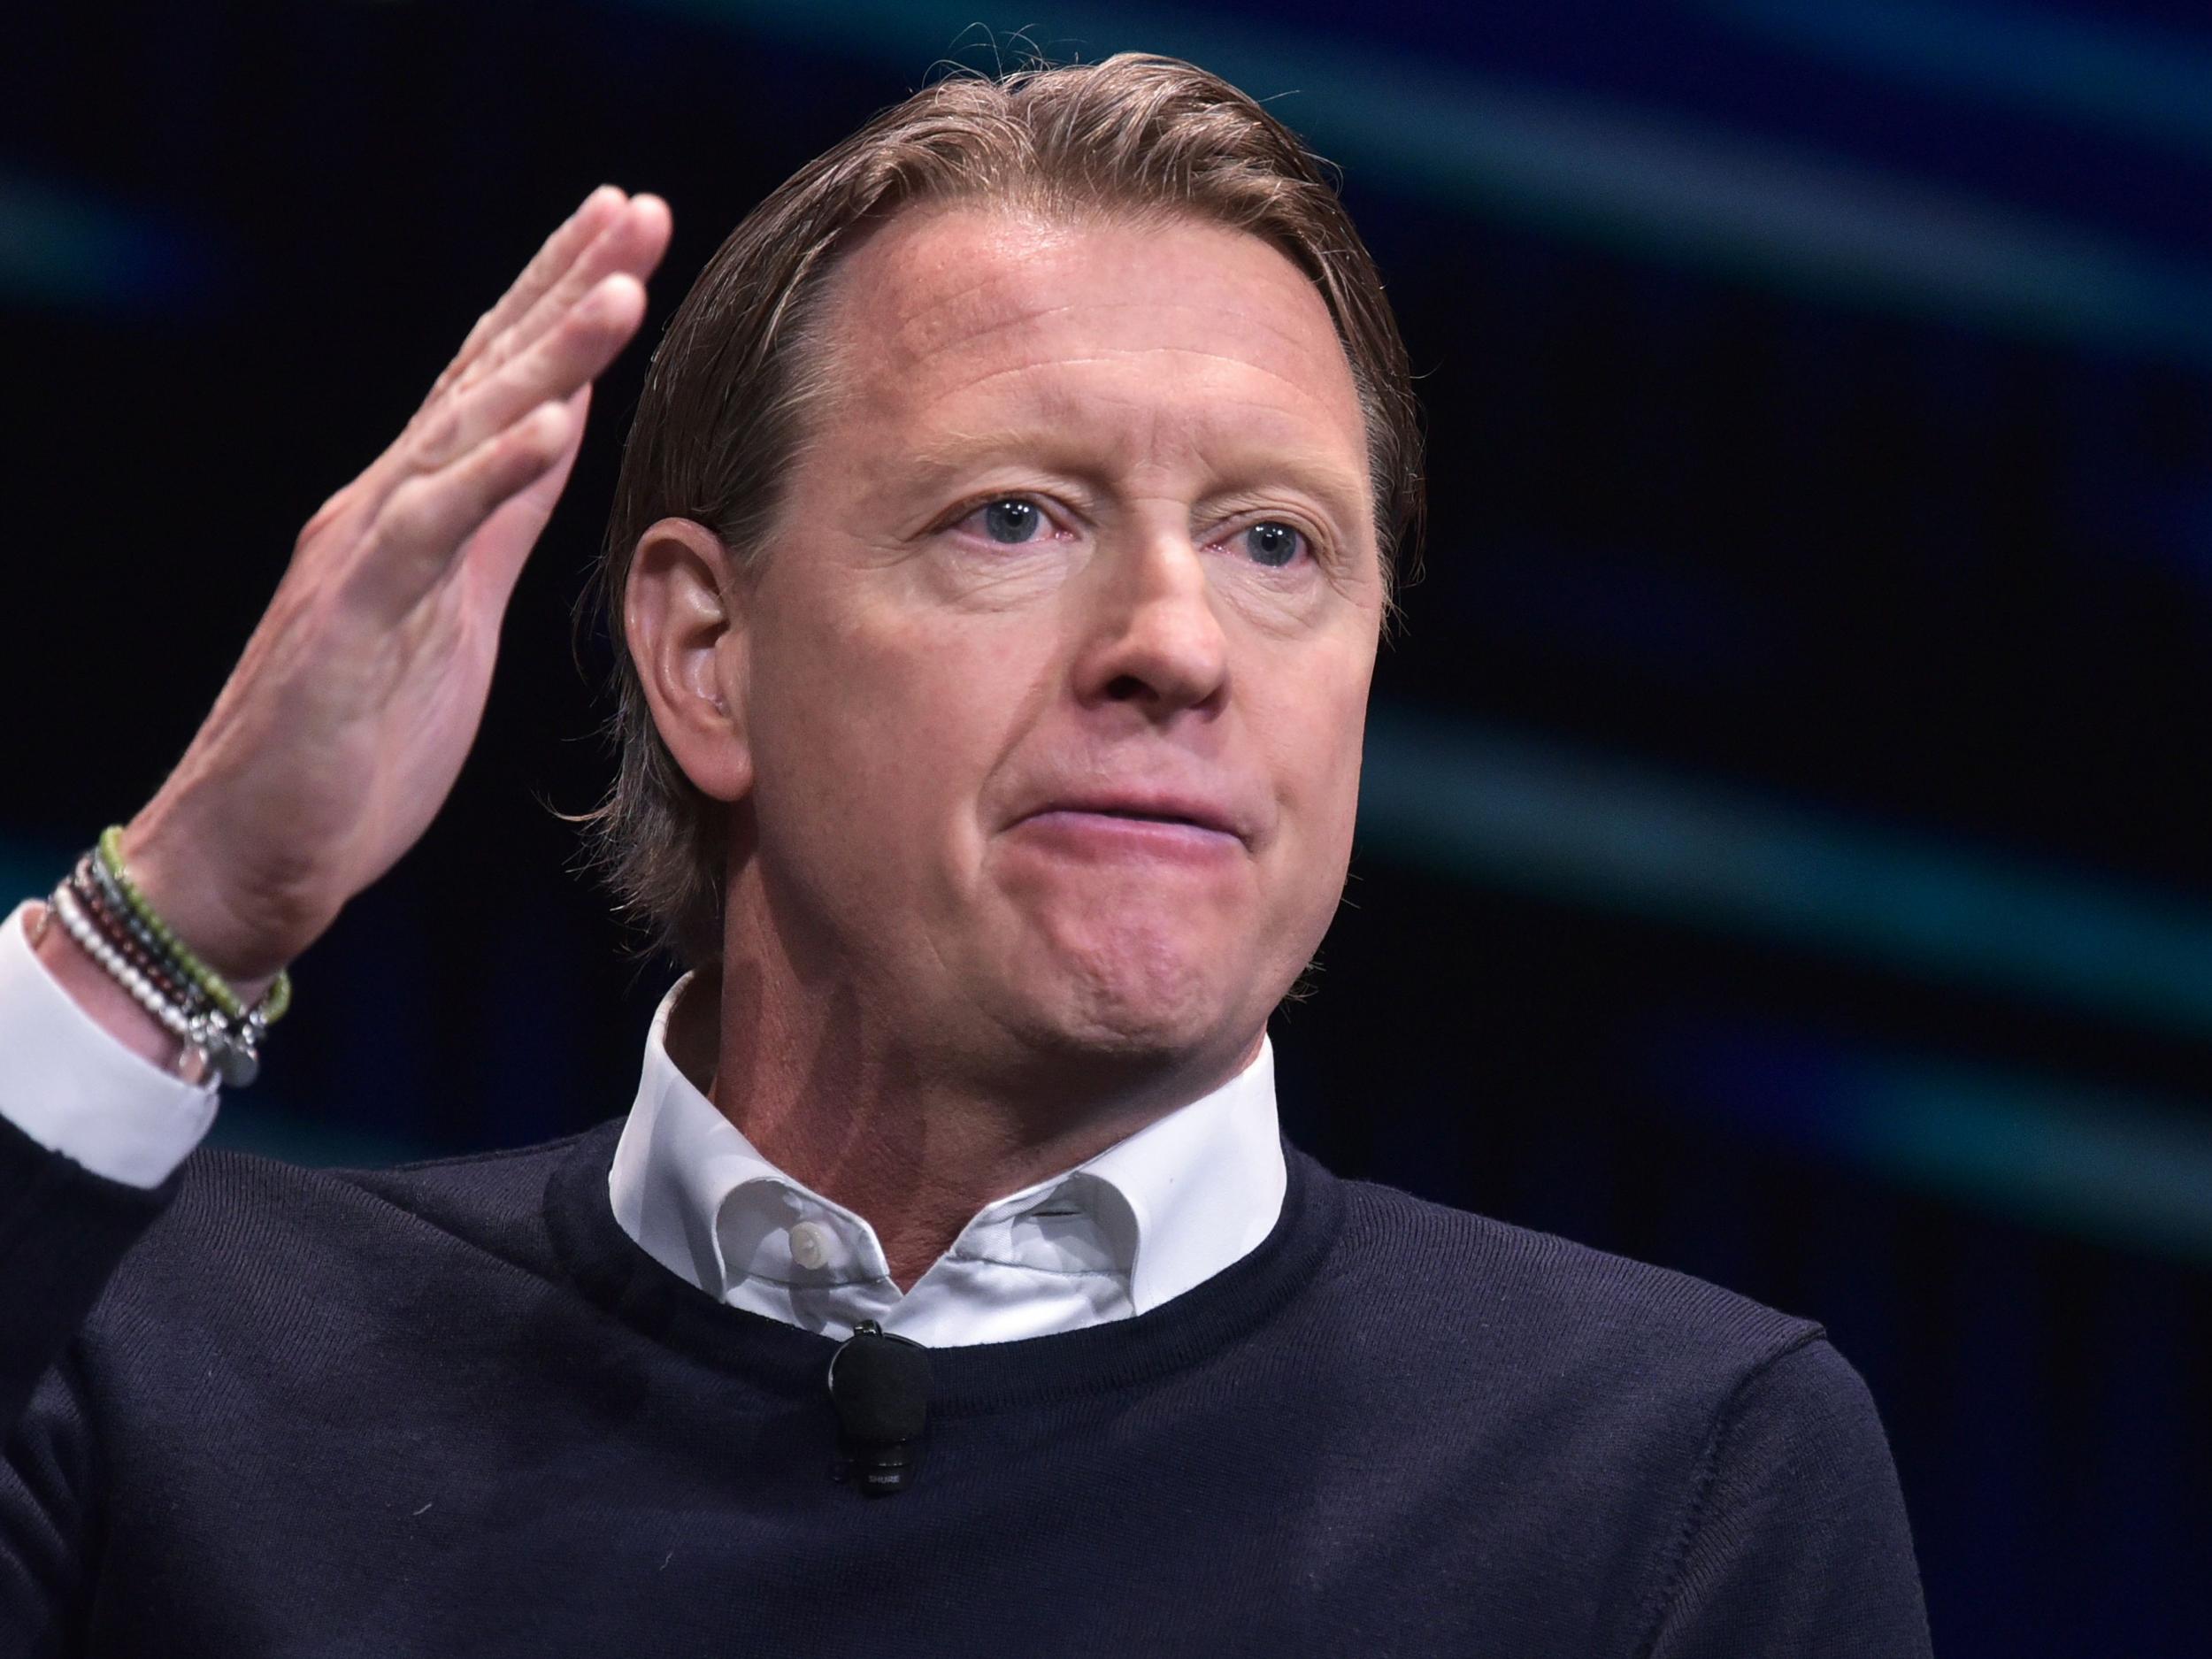 Verizon Executive Vice President, Hans Vestberg, speaks during a keynote discussion on 5G and mobile innovation during CES 2018 in Las Vegas in January (MANDEL NGAN/AFP/Getty Images)